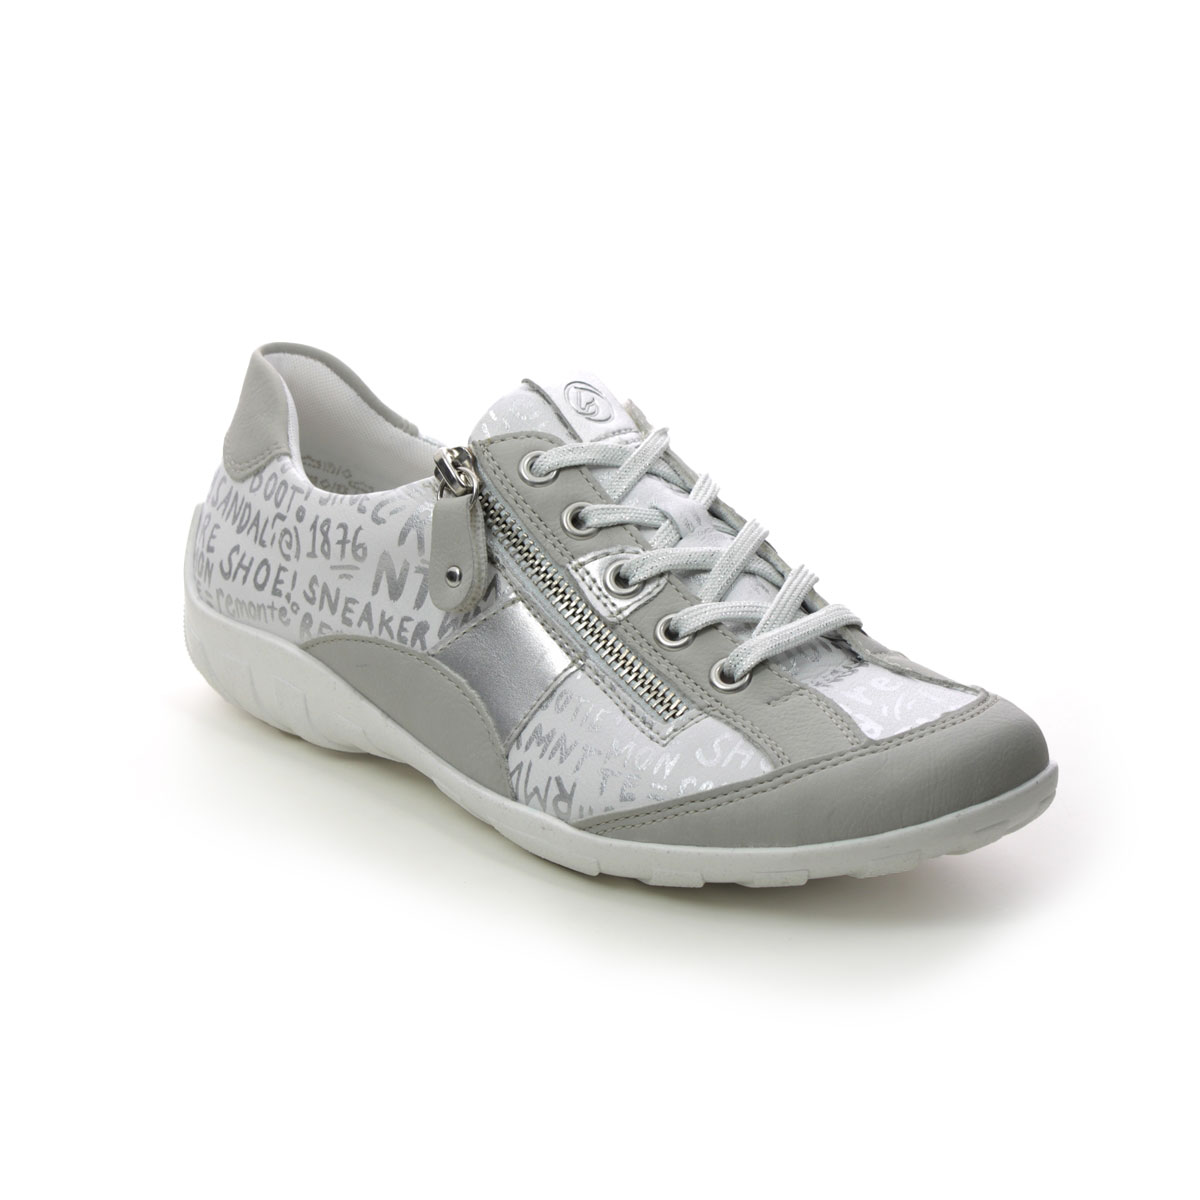 Remonte Livtext 21 Light Grey Leather Womens Lacing Shoes R3403-80 In Size 40 In Plain Light Grey Leather